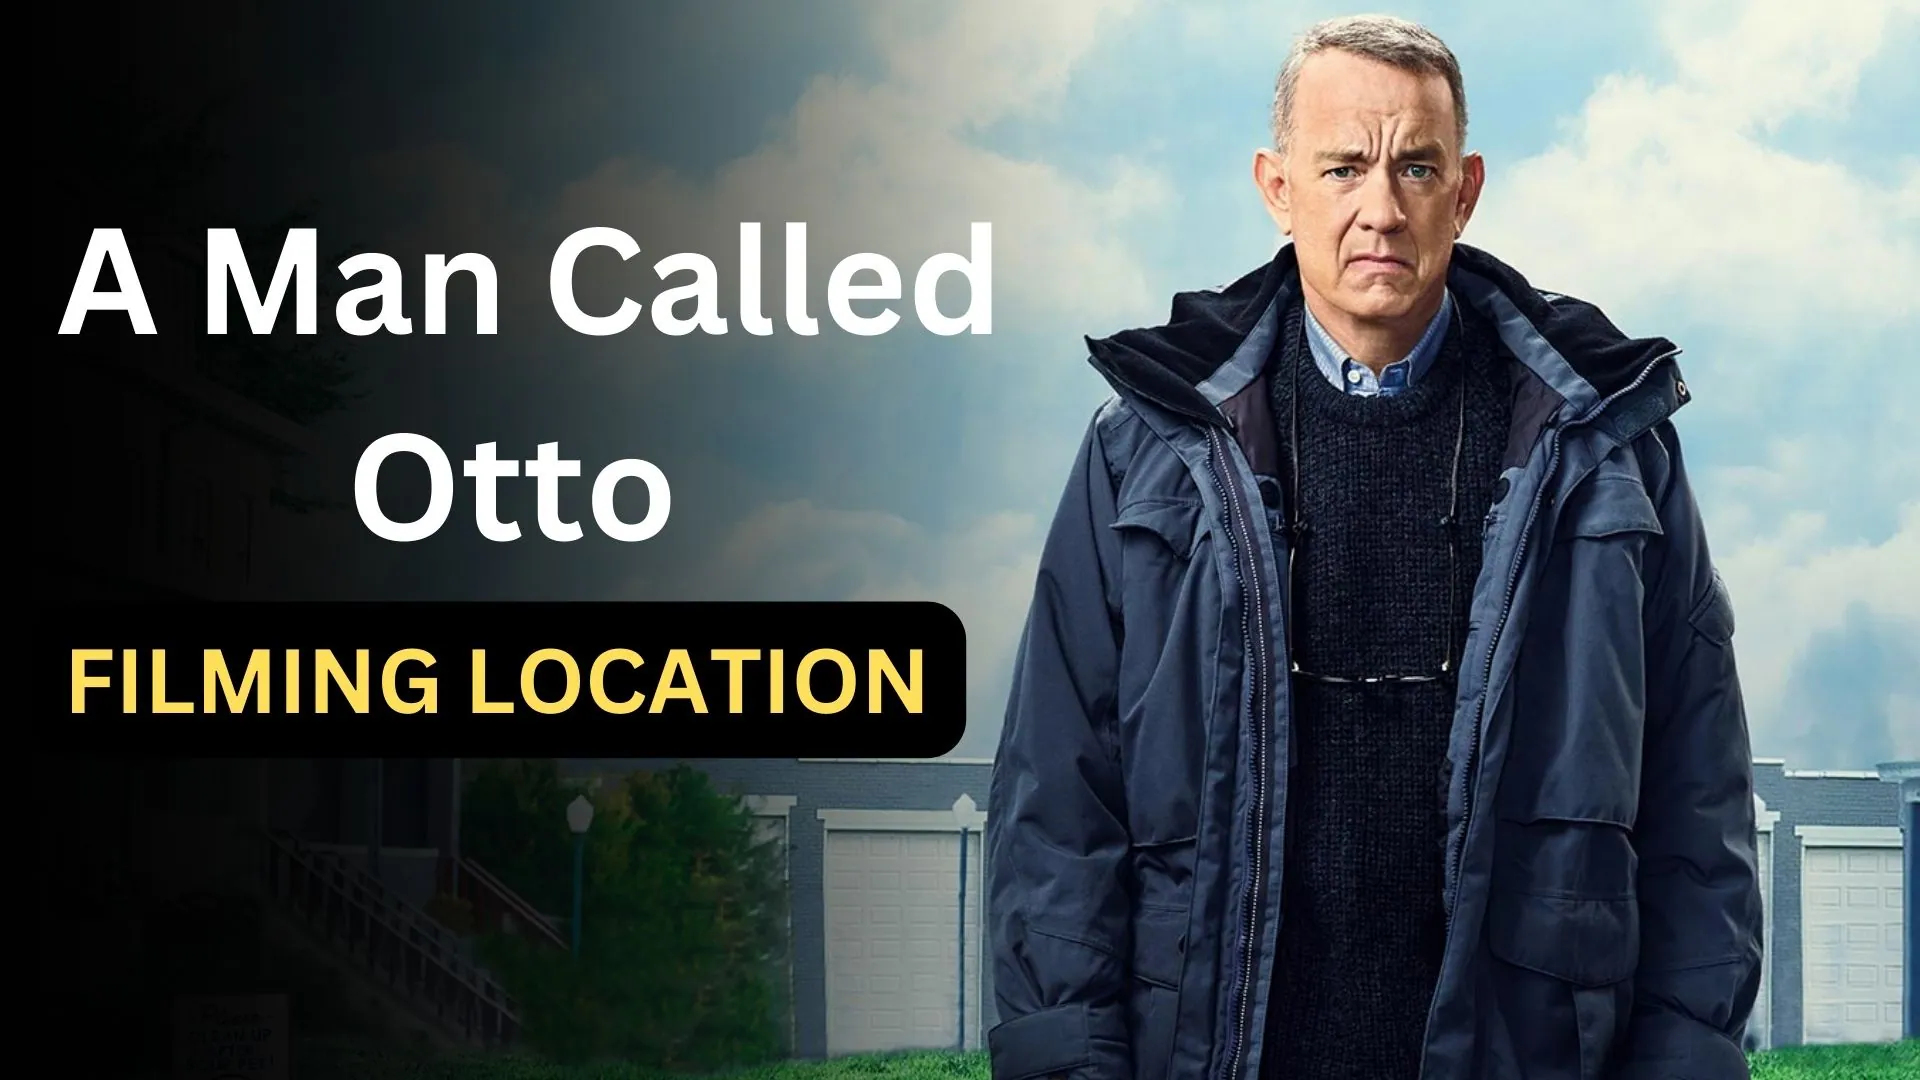 A Man Called Otto Filming Location